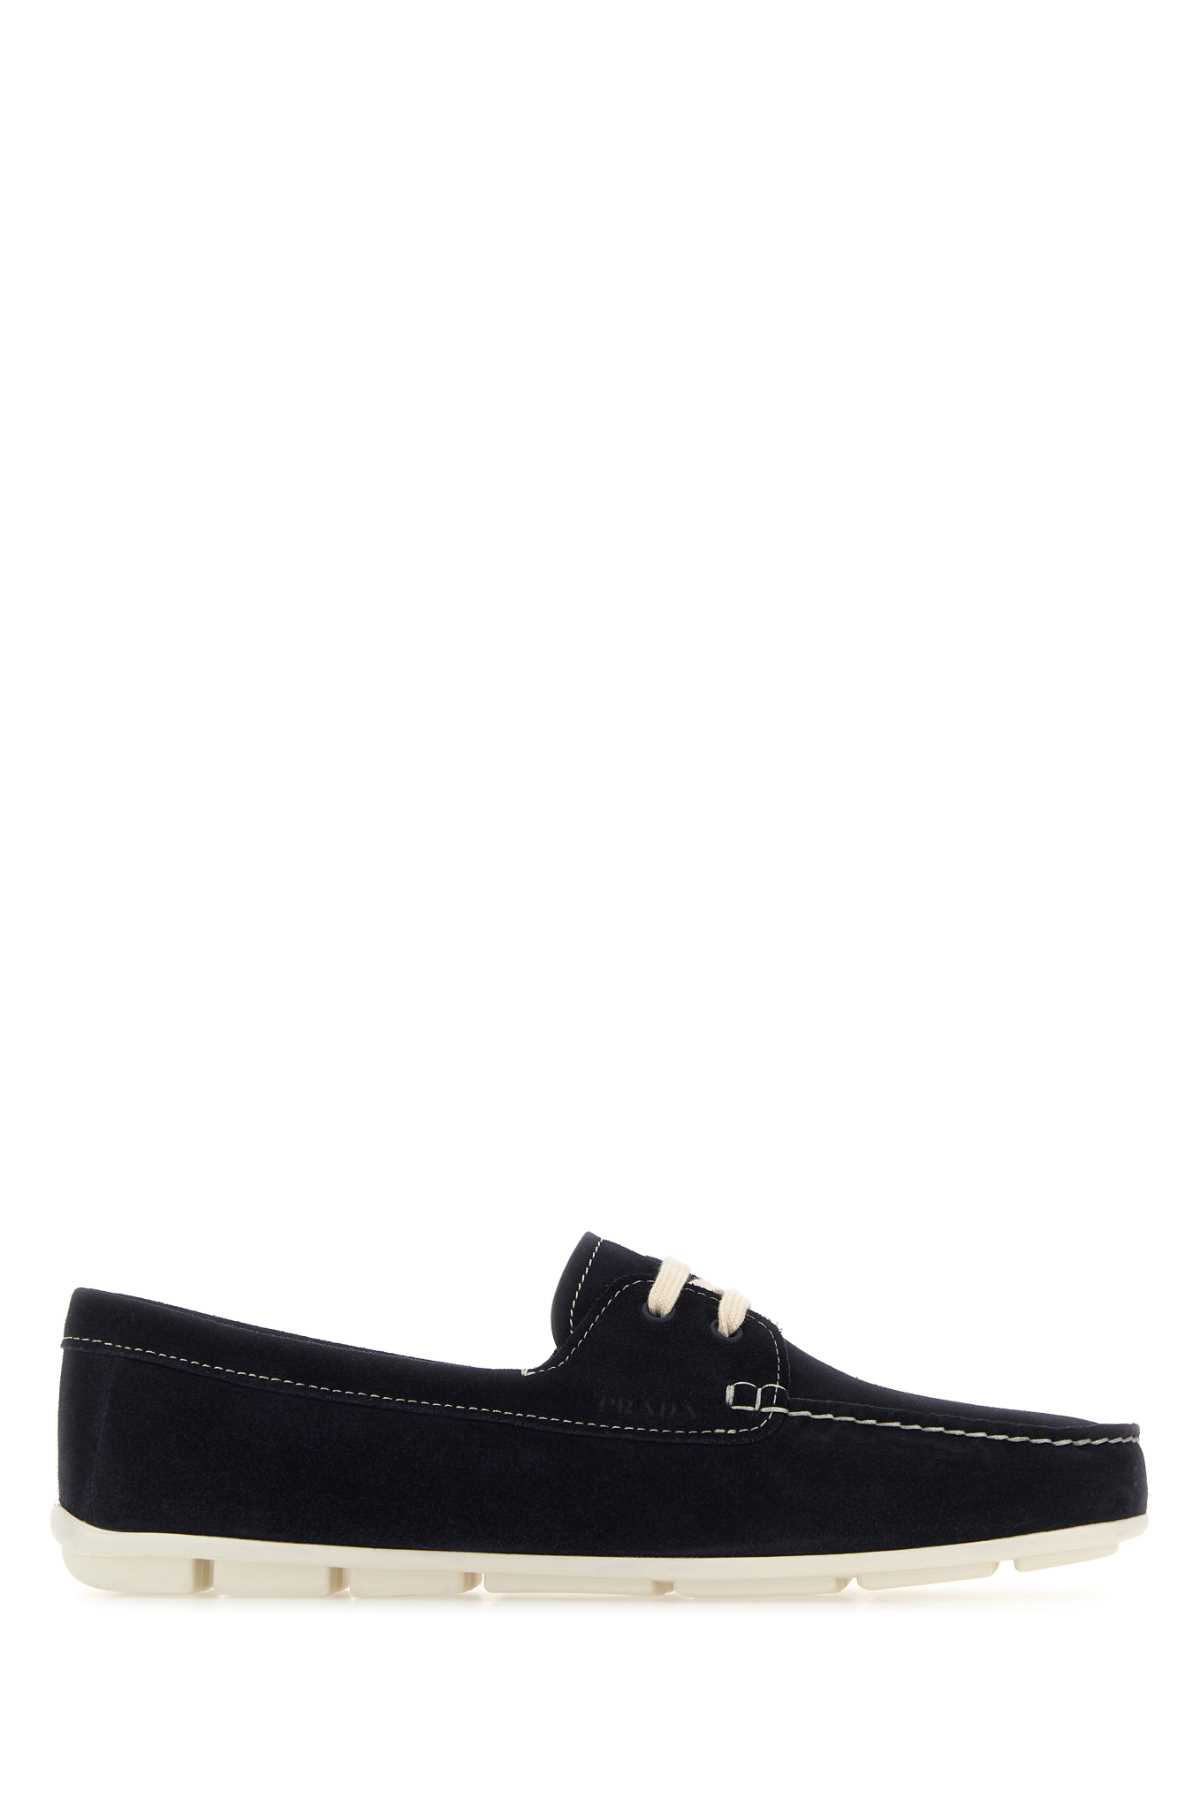 Prada Midnight Blue Suede Driver Loafers